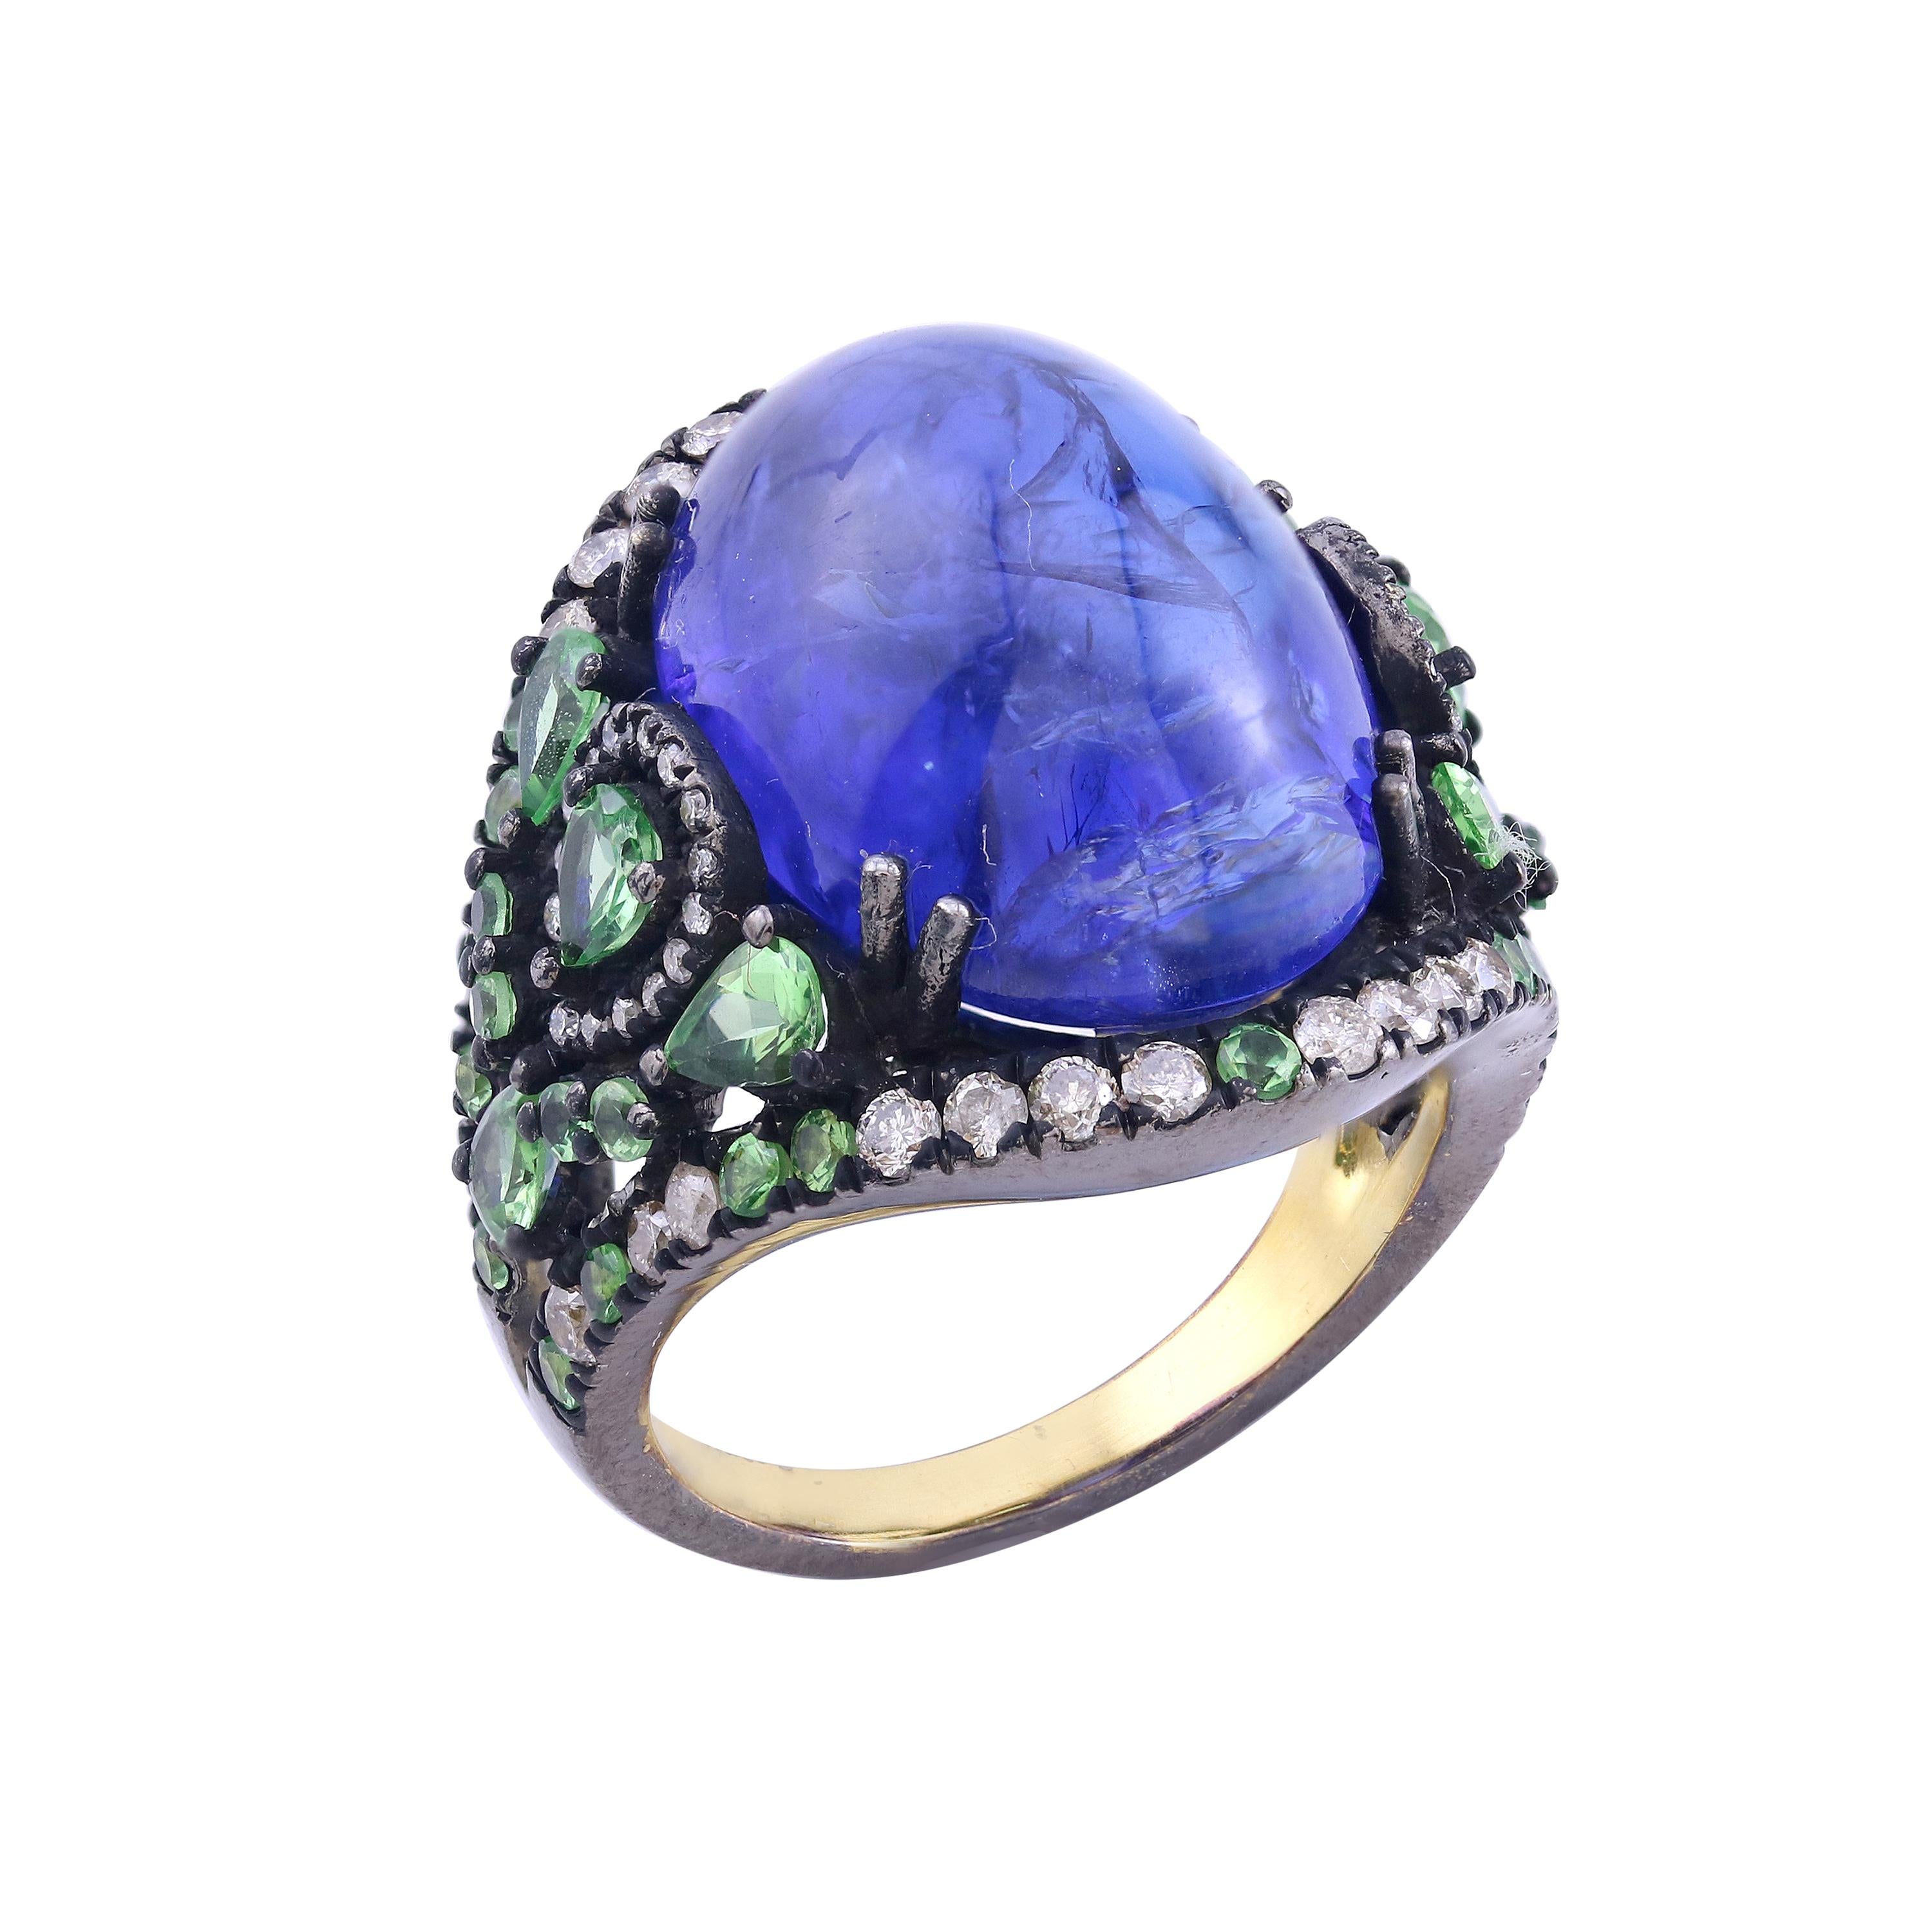 Introducing our exquisite Victorian Split Shank Dome Ring, a true masterpiece that showcases the harmonious combination of a captivating tanzanite, vibrant tsavorites, and dazzling diamonds. Crafted in a luxurious 18K/925 gold setting with black